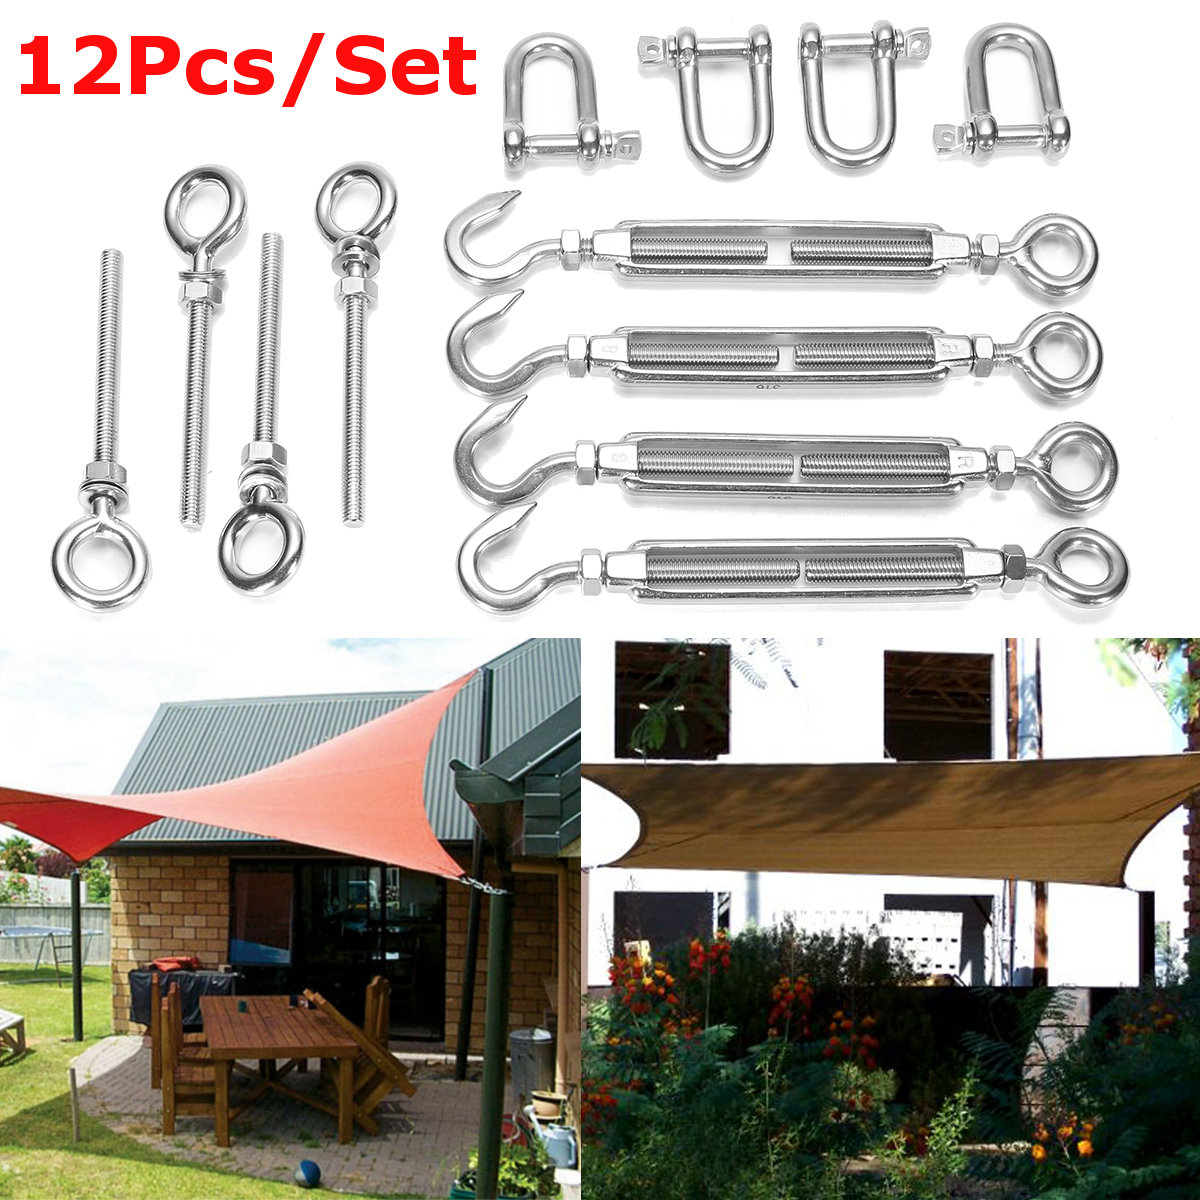 12Pcs/Set Shade Sail Kit 6mm Stainless Steel Marine 4-Point Square Rectangle Cloth